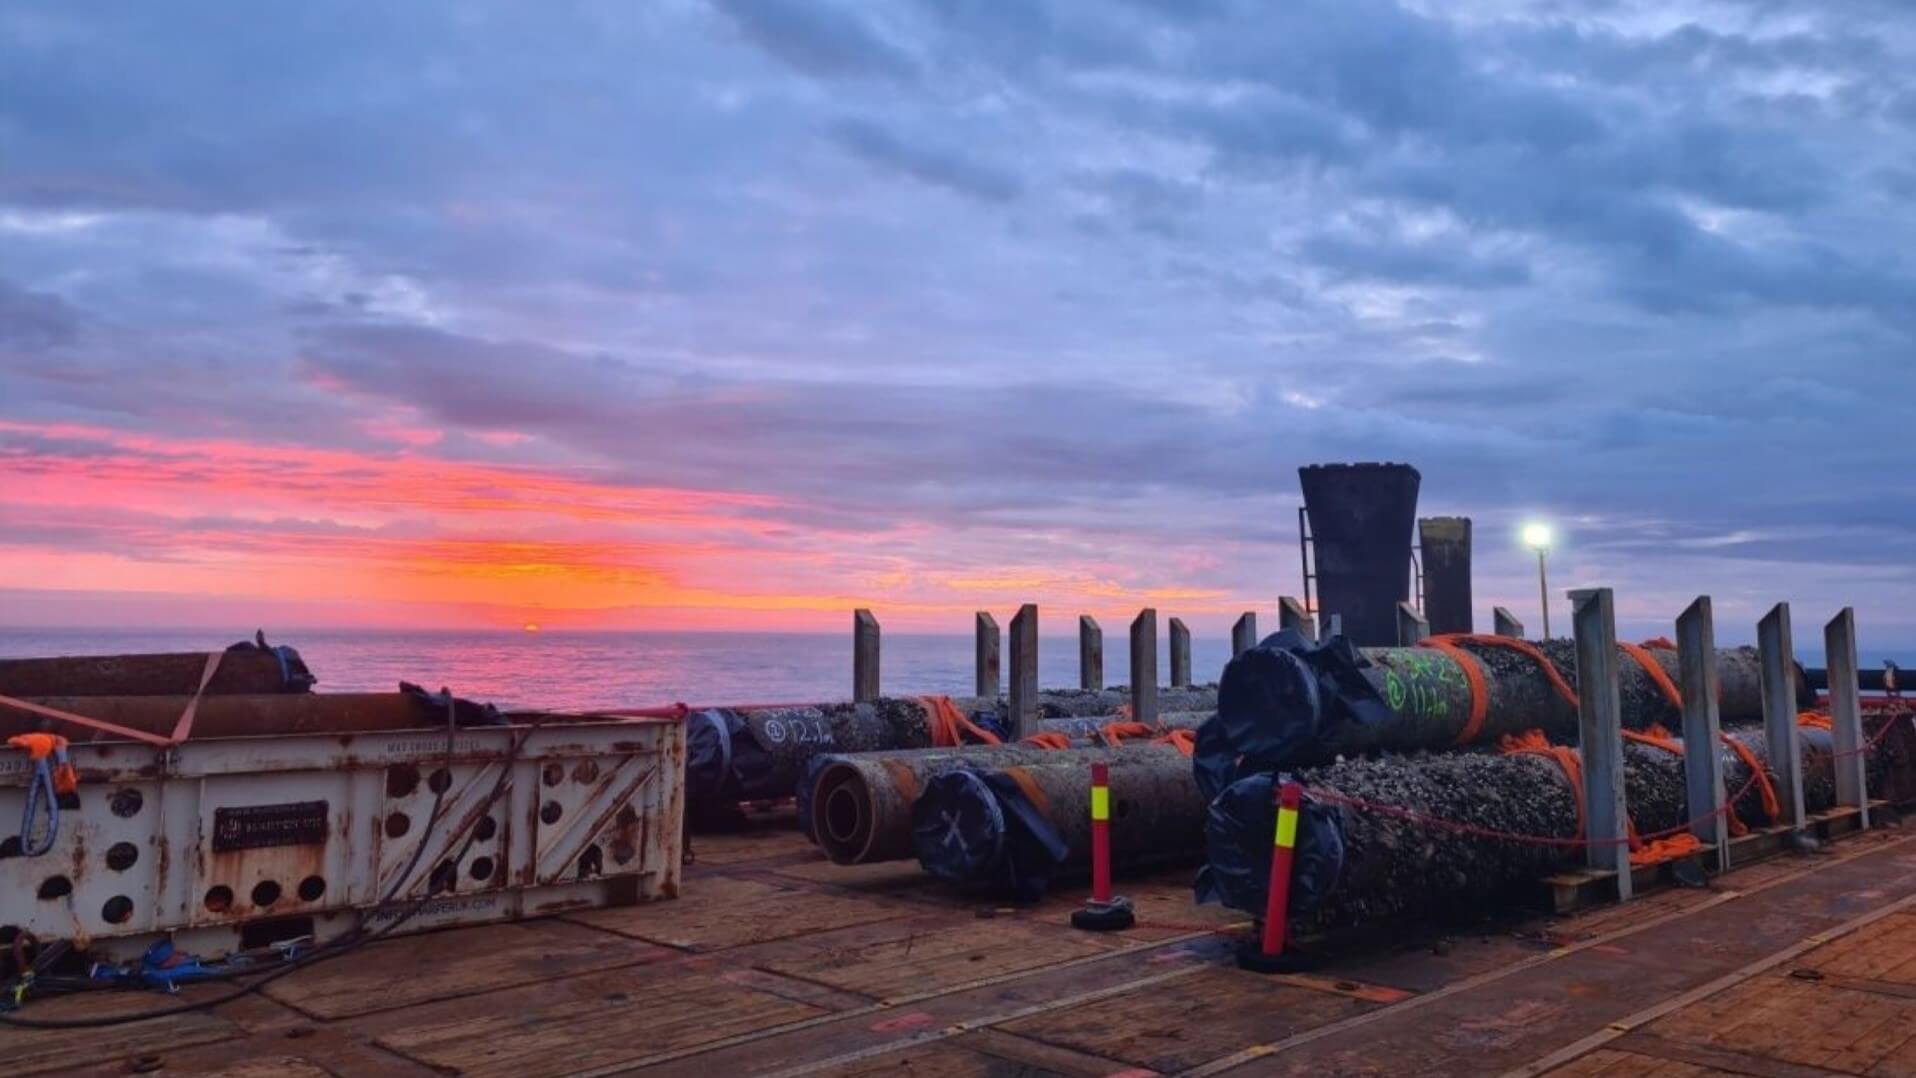 offshore pipework laying on side on deck of vessel at sea, against blue and pink sunset sky